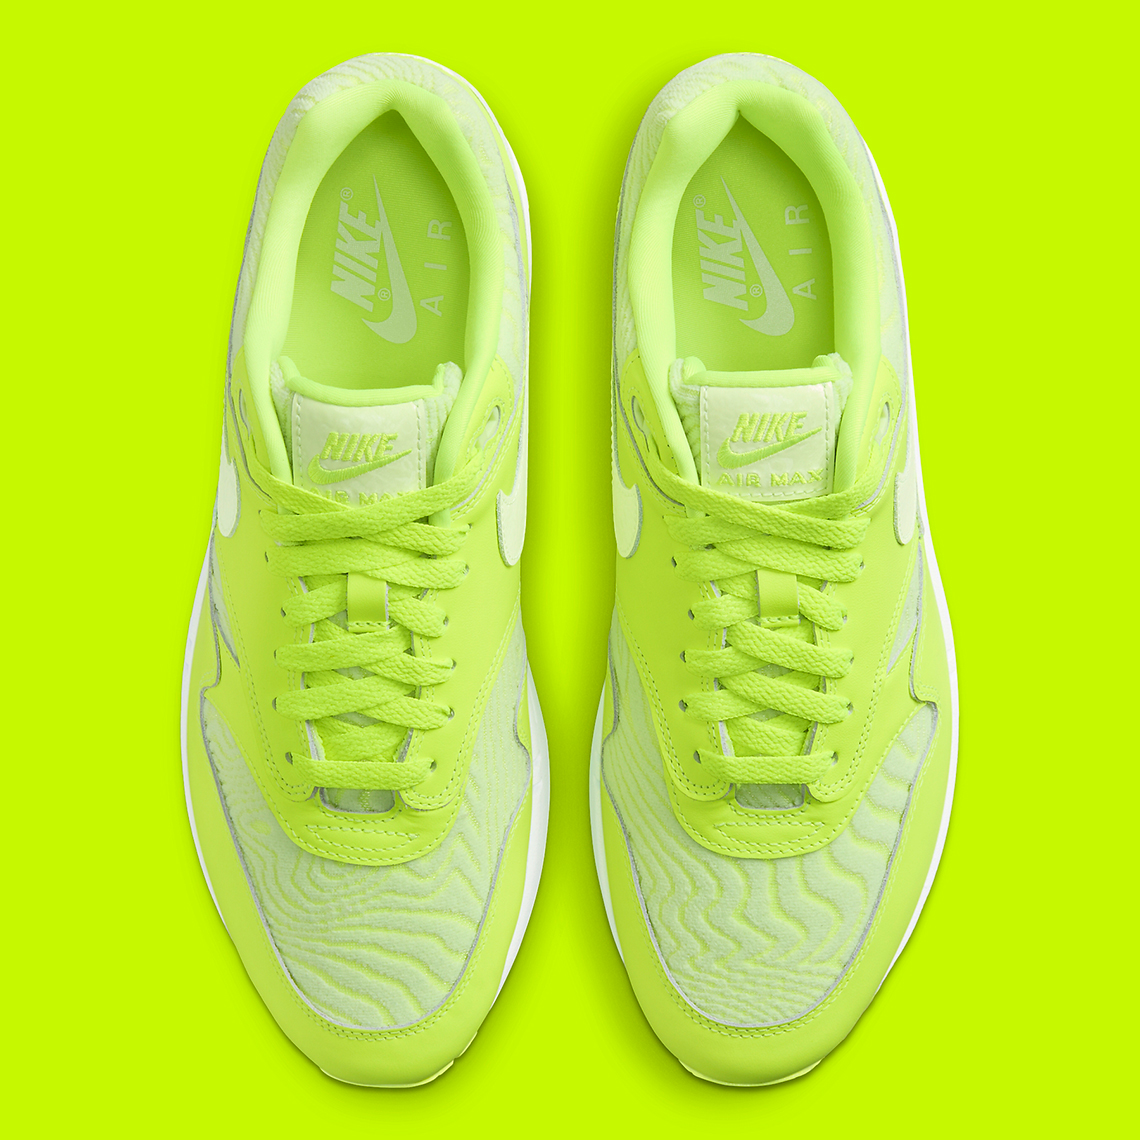 Nike Air Max 1 Volt Topography Fn6832 702 1